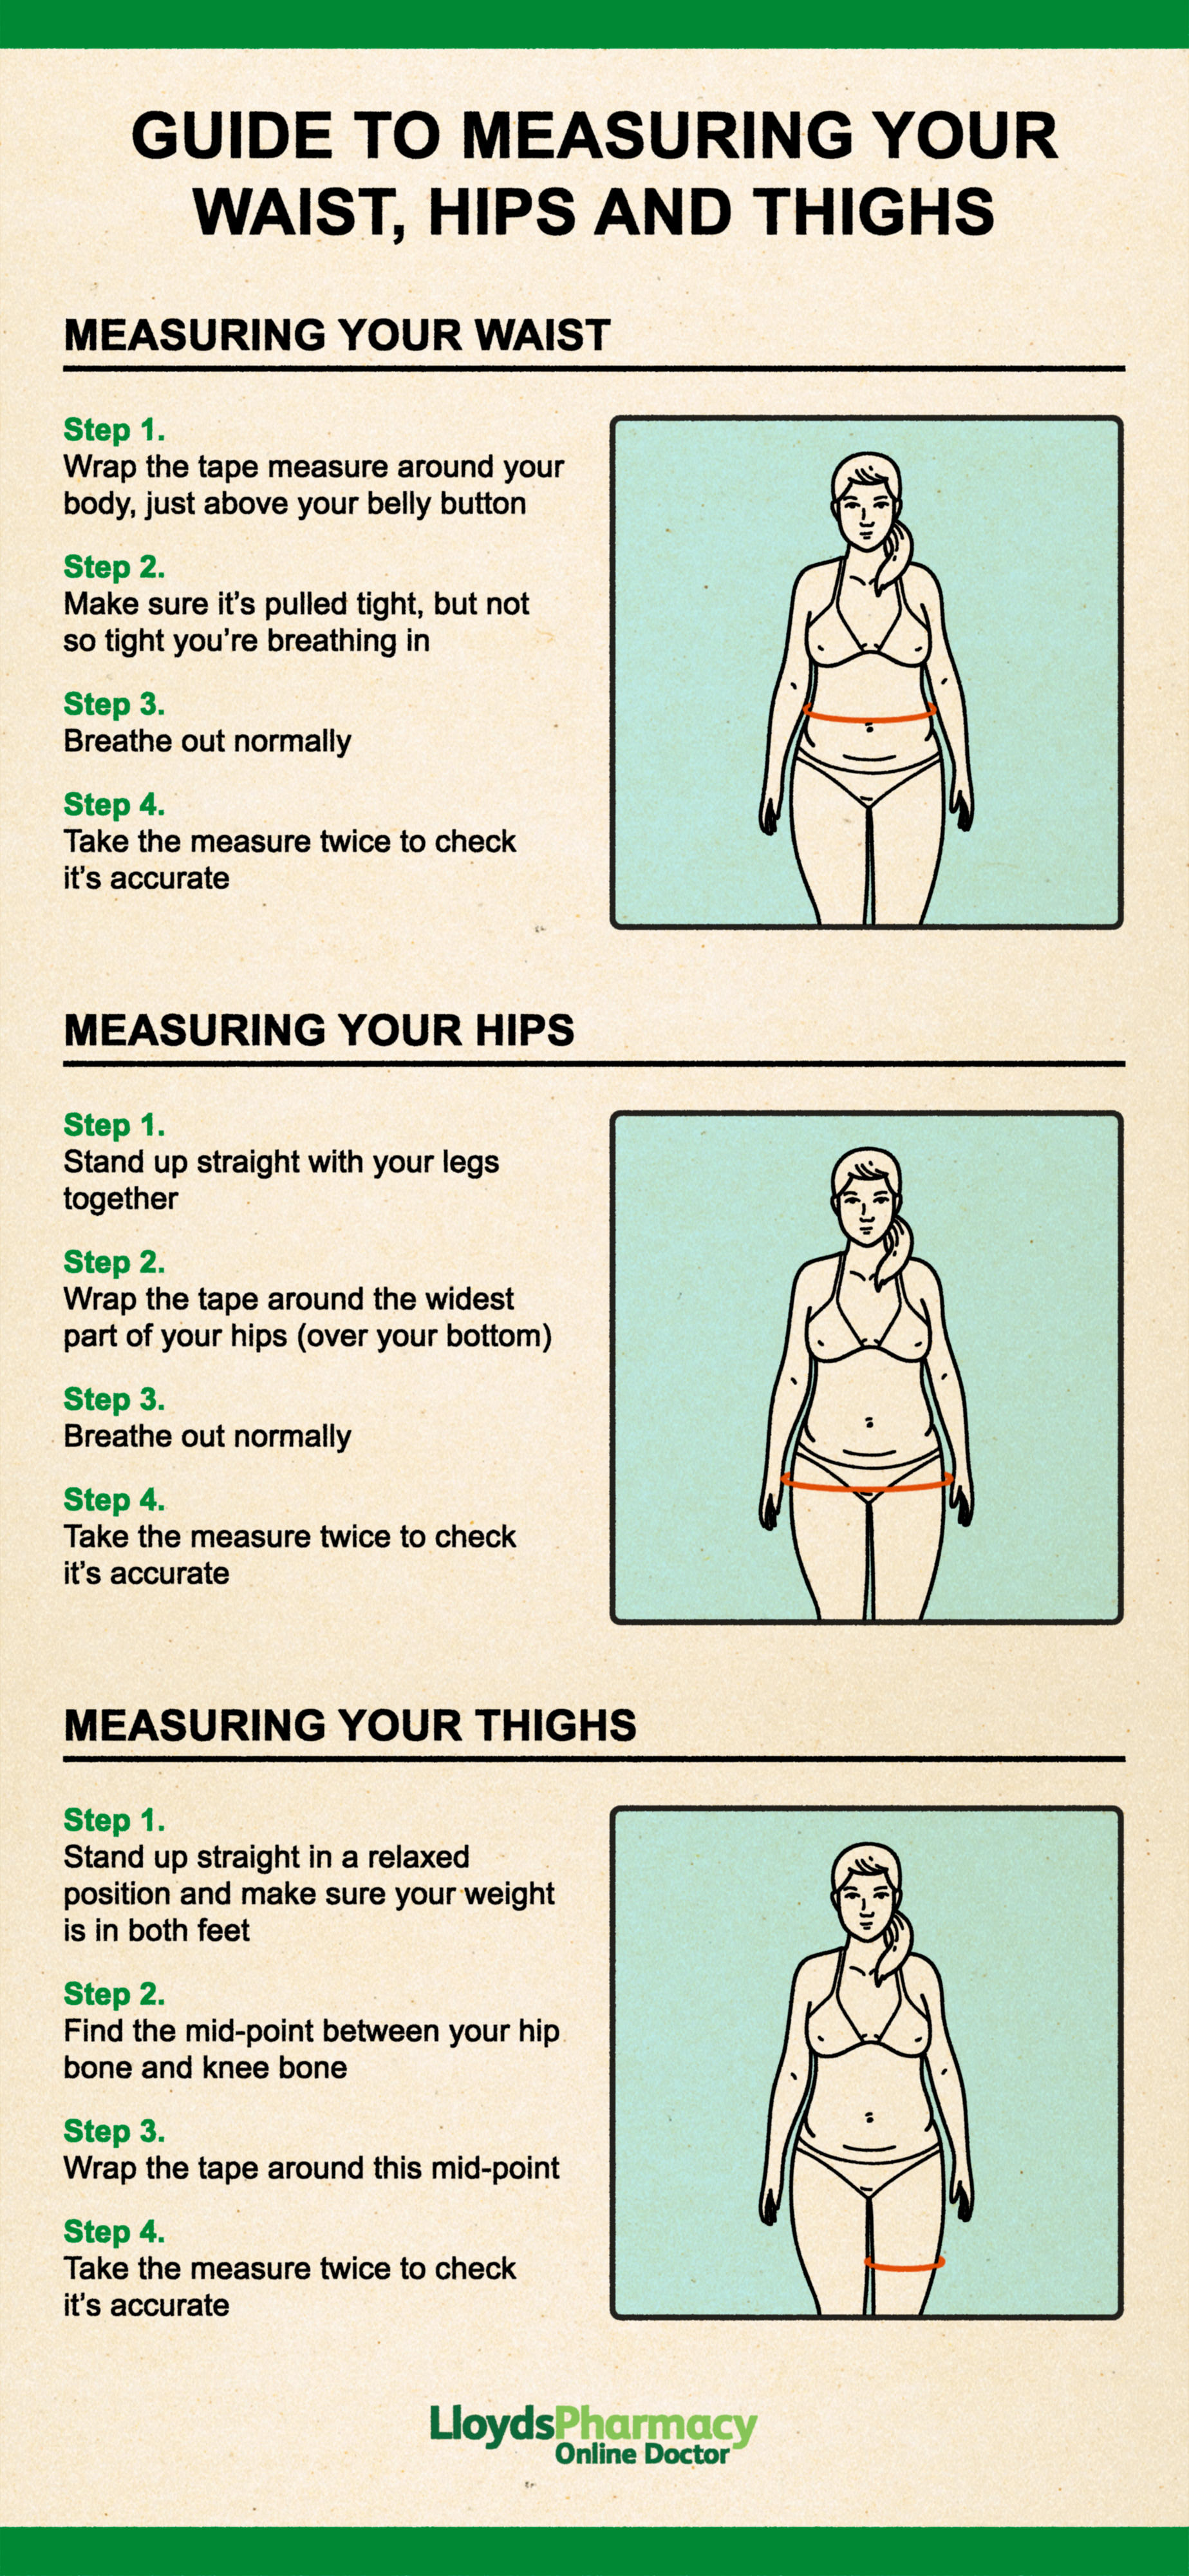 https://onlinedoctor.lloydspharmacy.com/blob/163884/221ac46c43eeb7d228261065afb53e0d/guide-to-measuring-your-waist--hips-and-thighs---picture-data.jpg